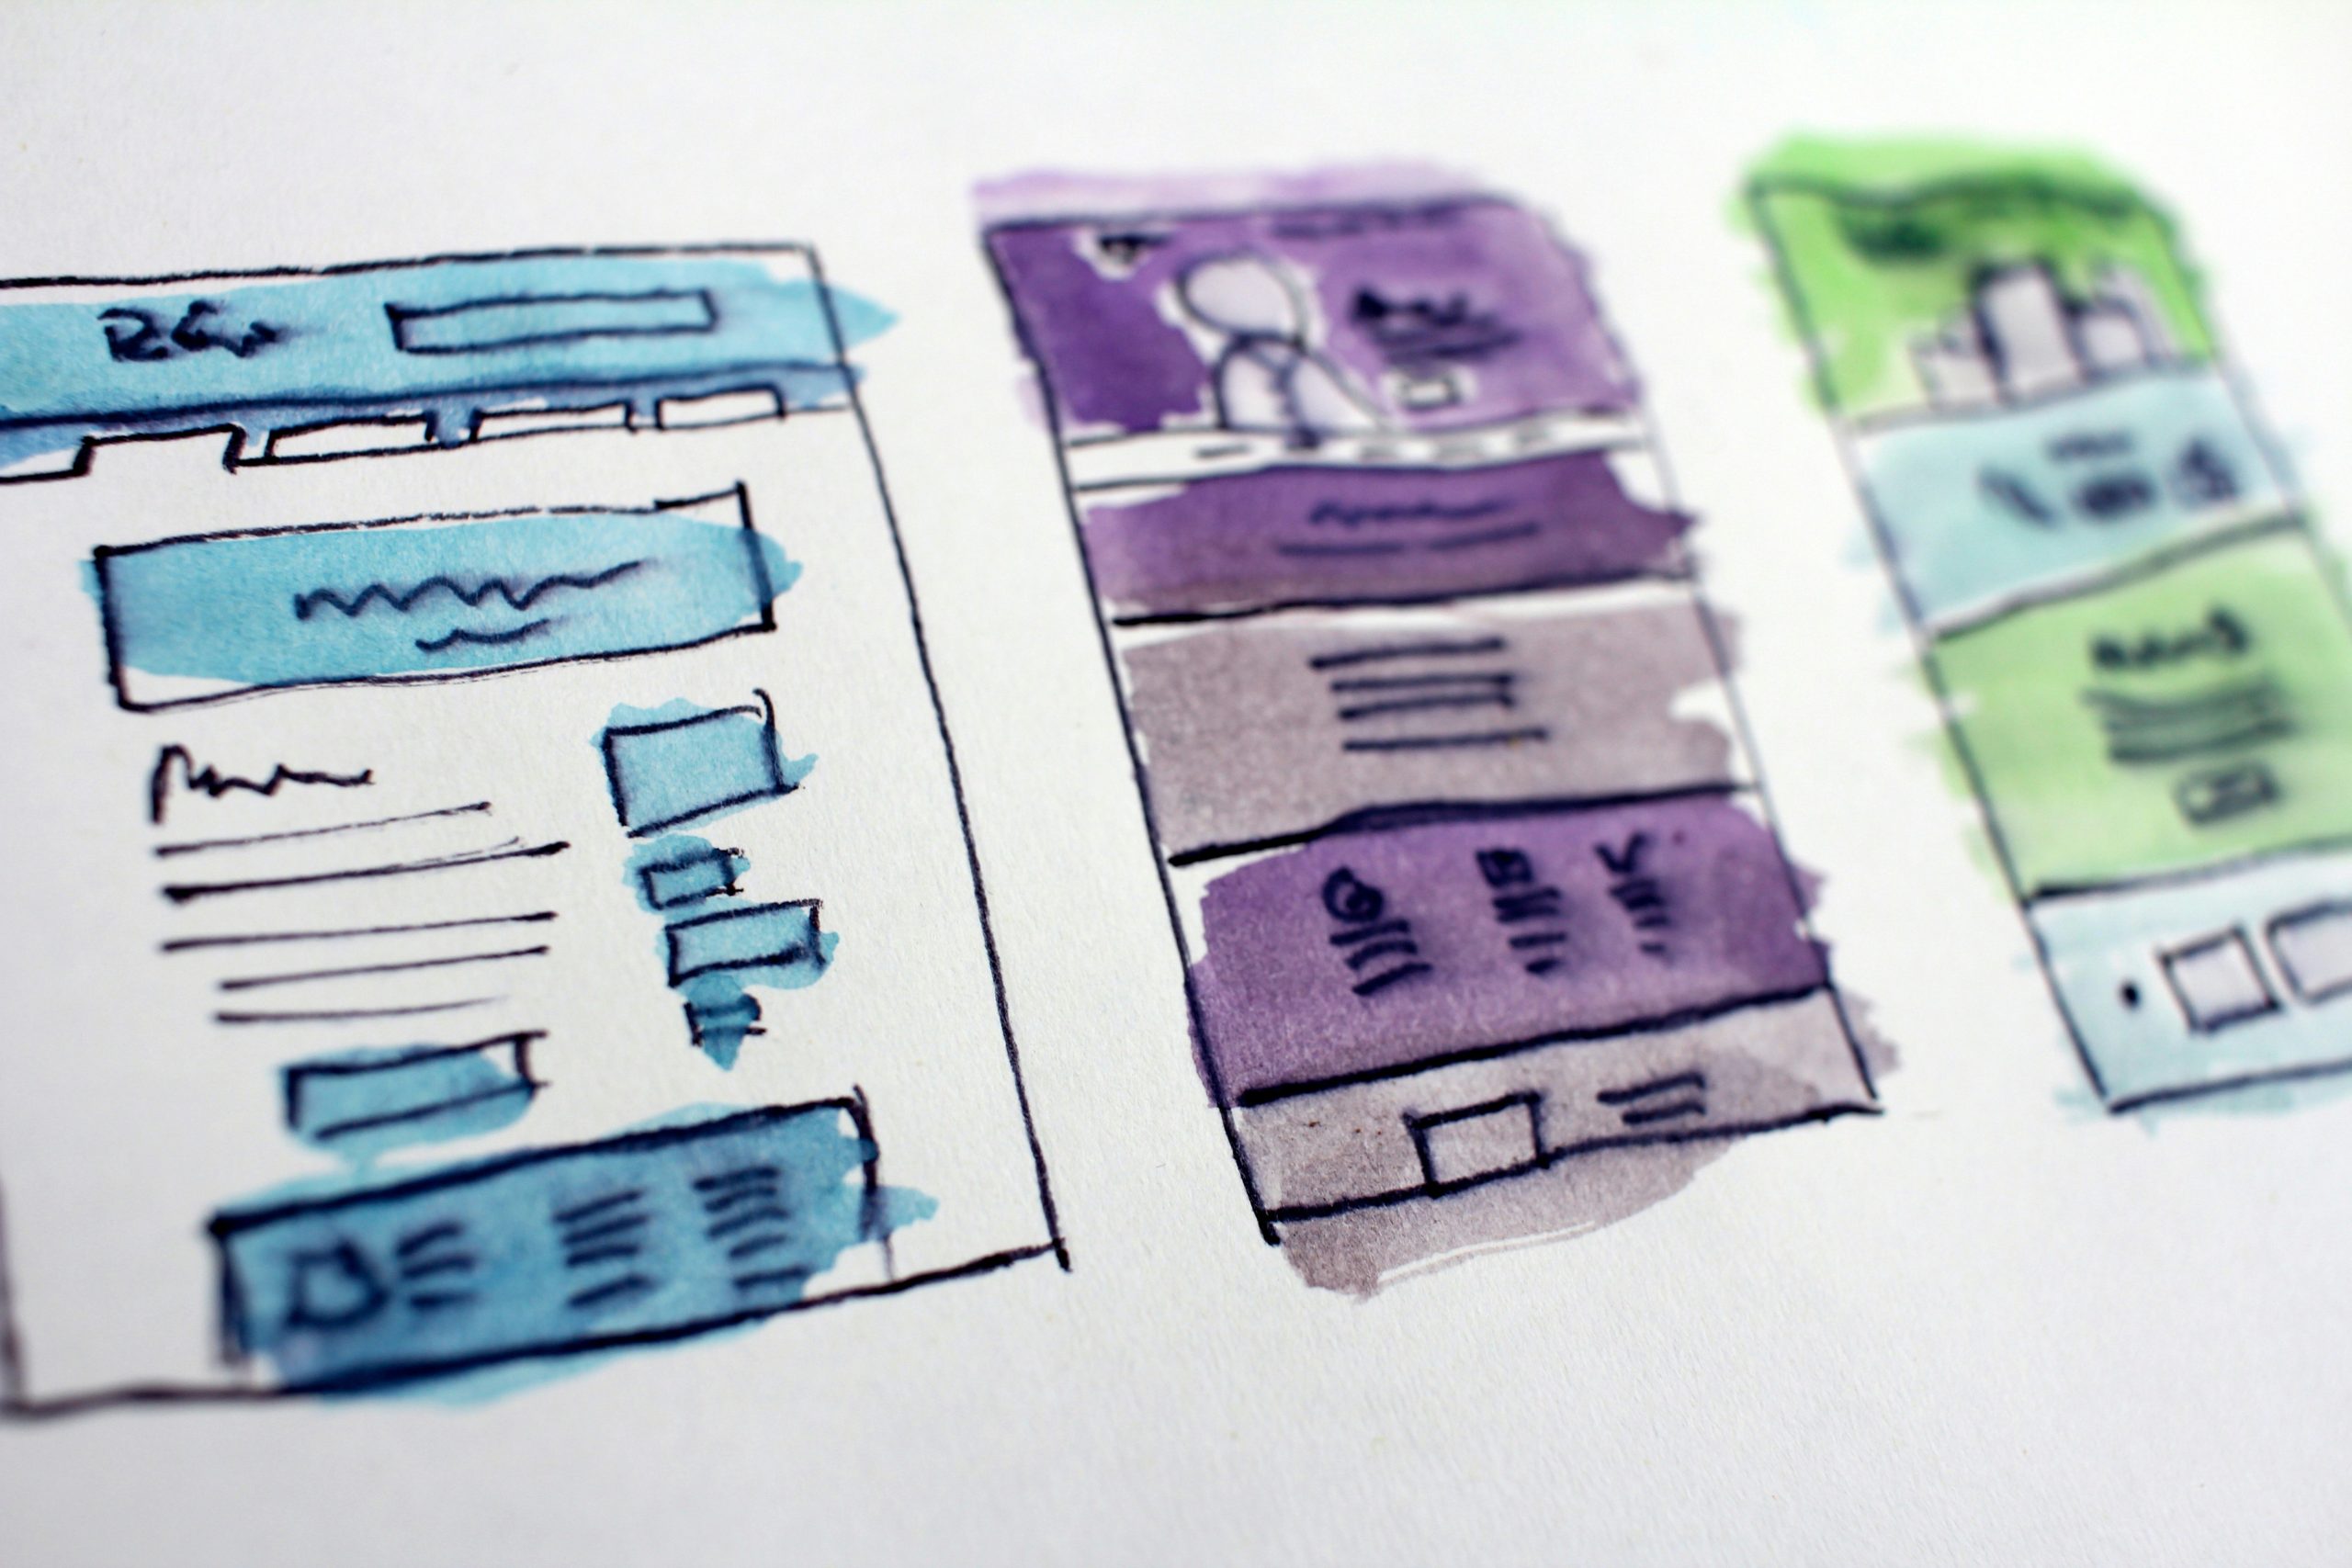 Web Design as a Tool for Showcasing Work and Branding Your Company